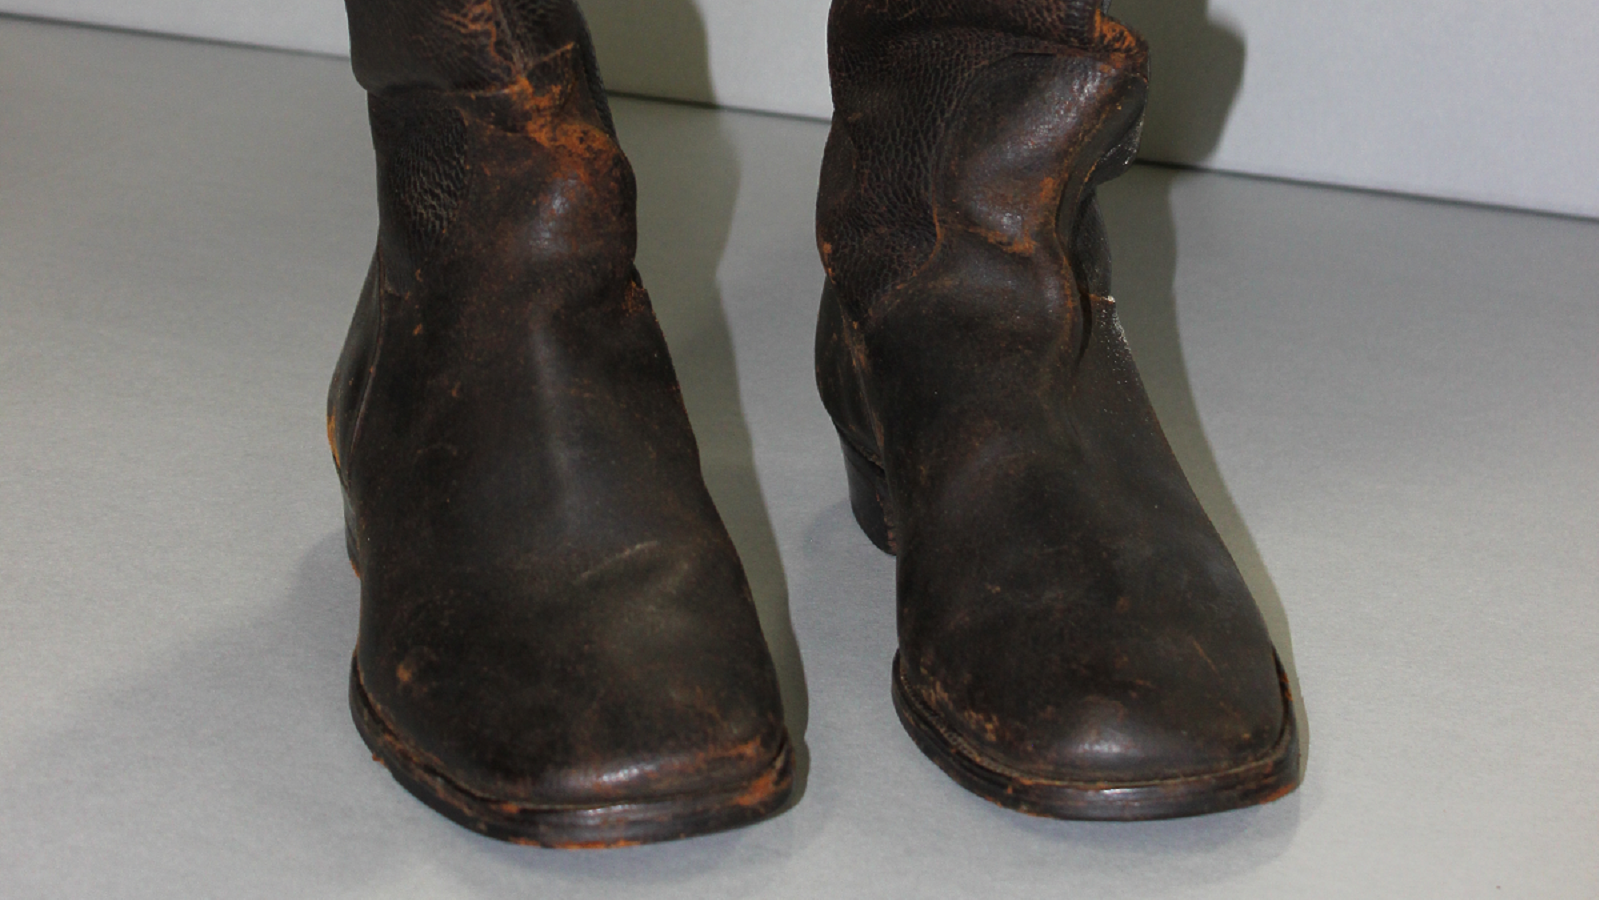 Old pair of brown, tall riding boots against a gray background. 